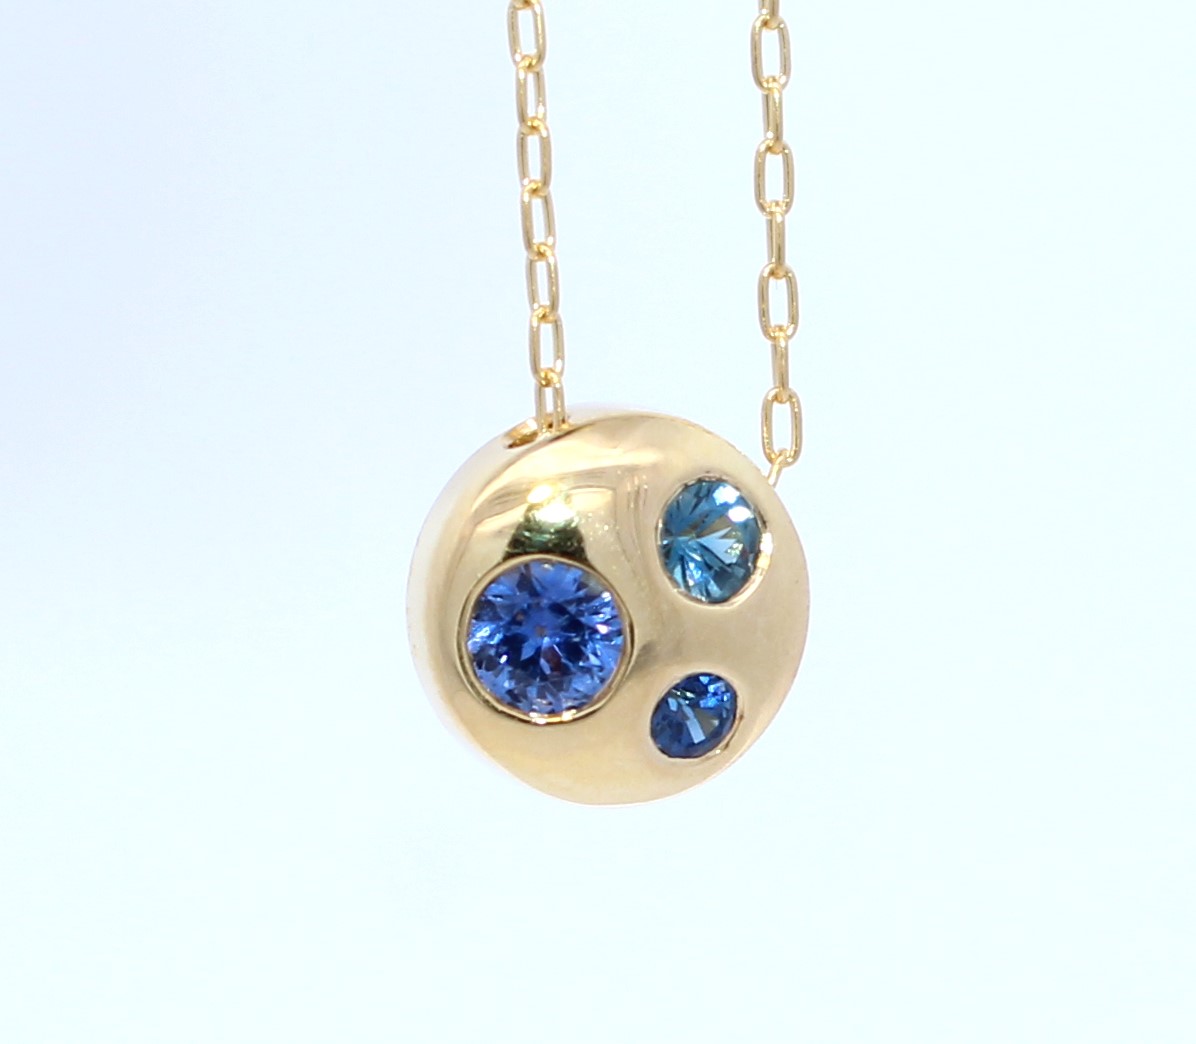 Lauren K 18 Karat Yellow Gold Blue Sapphire Necklace 18 Inches From The Polly Collection